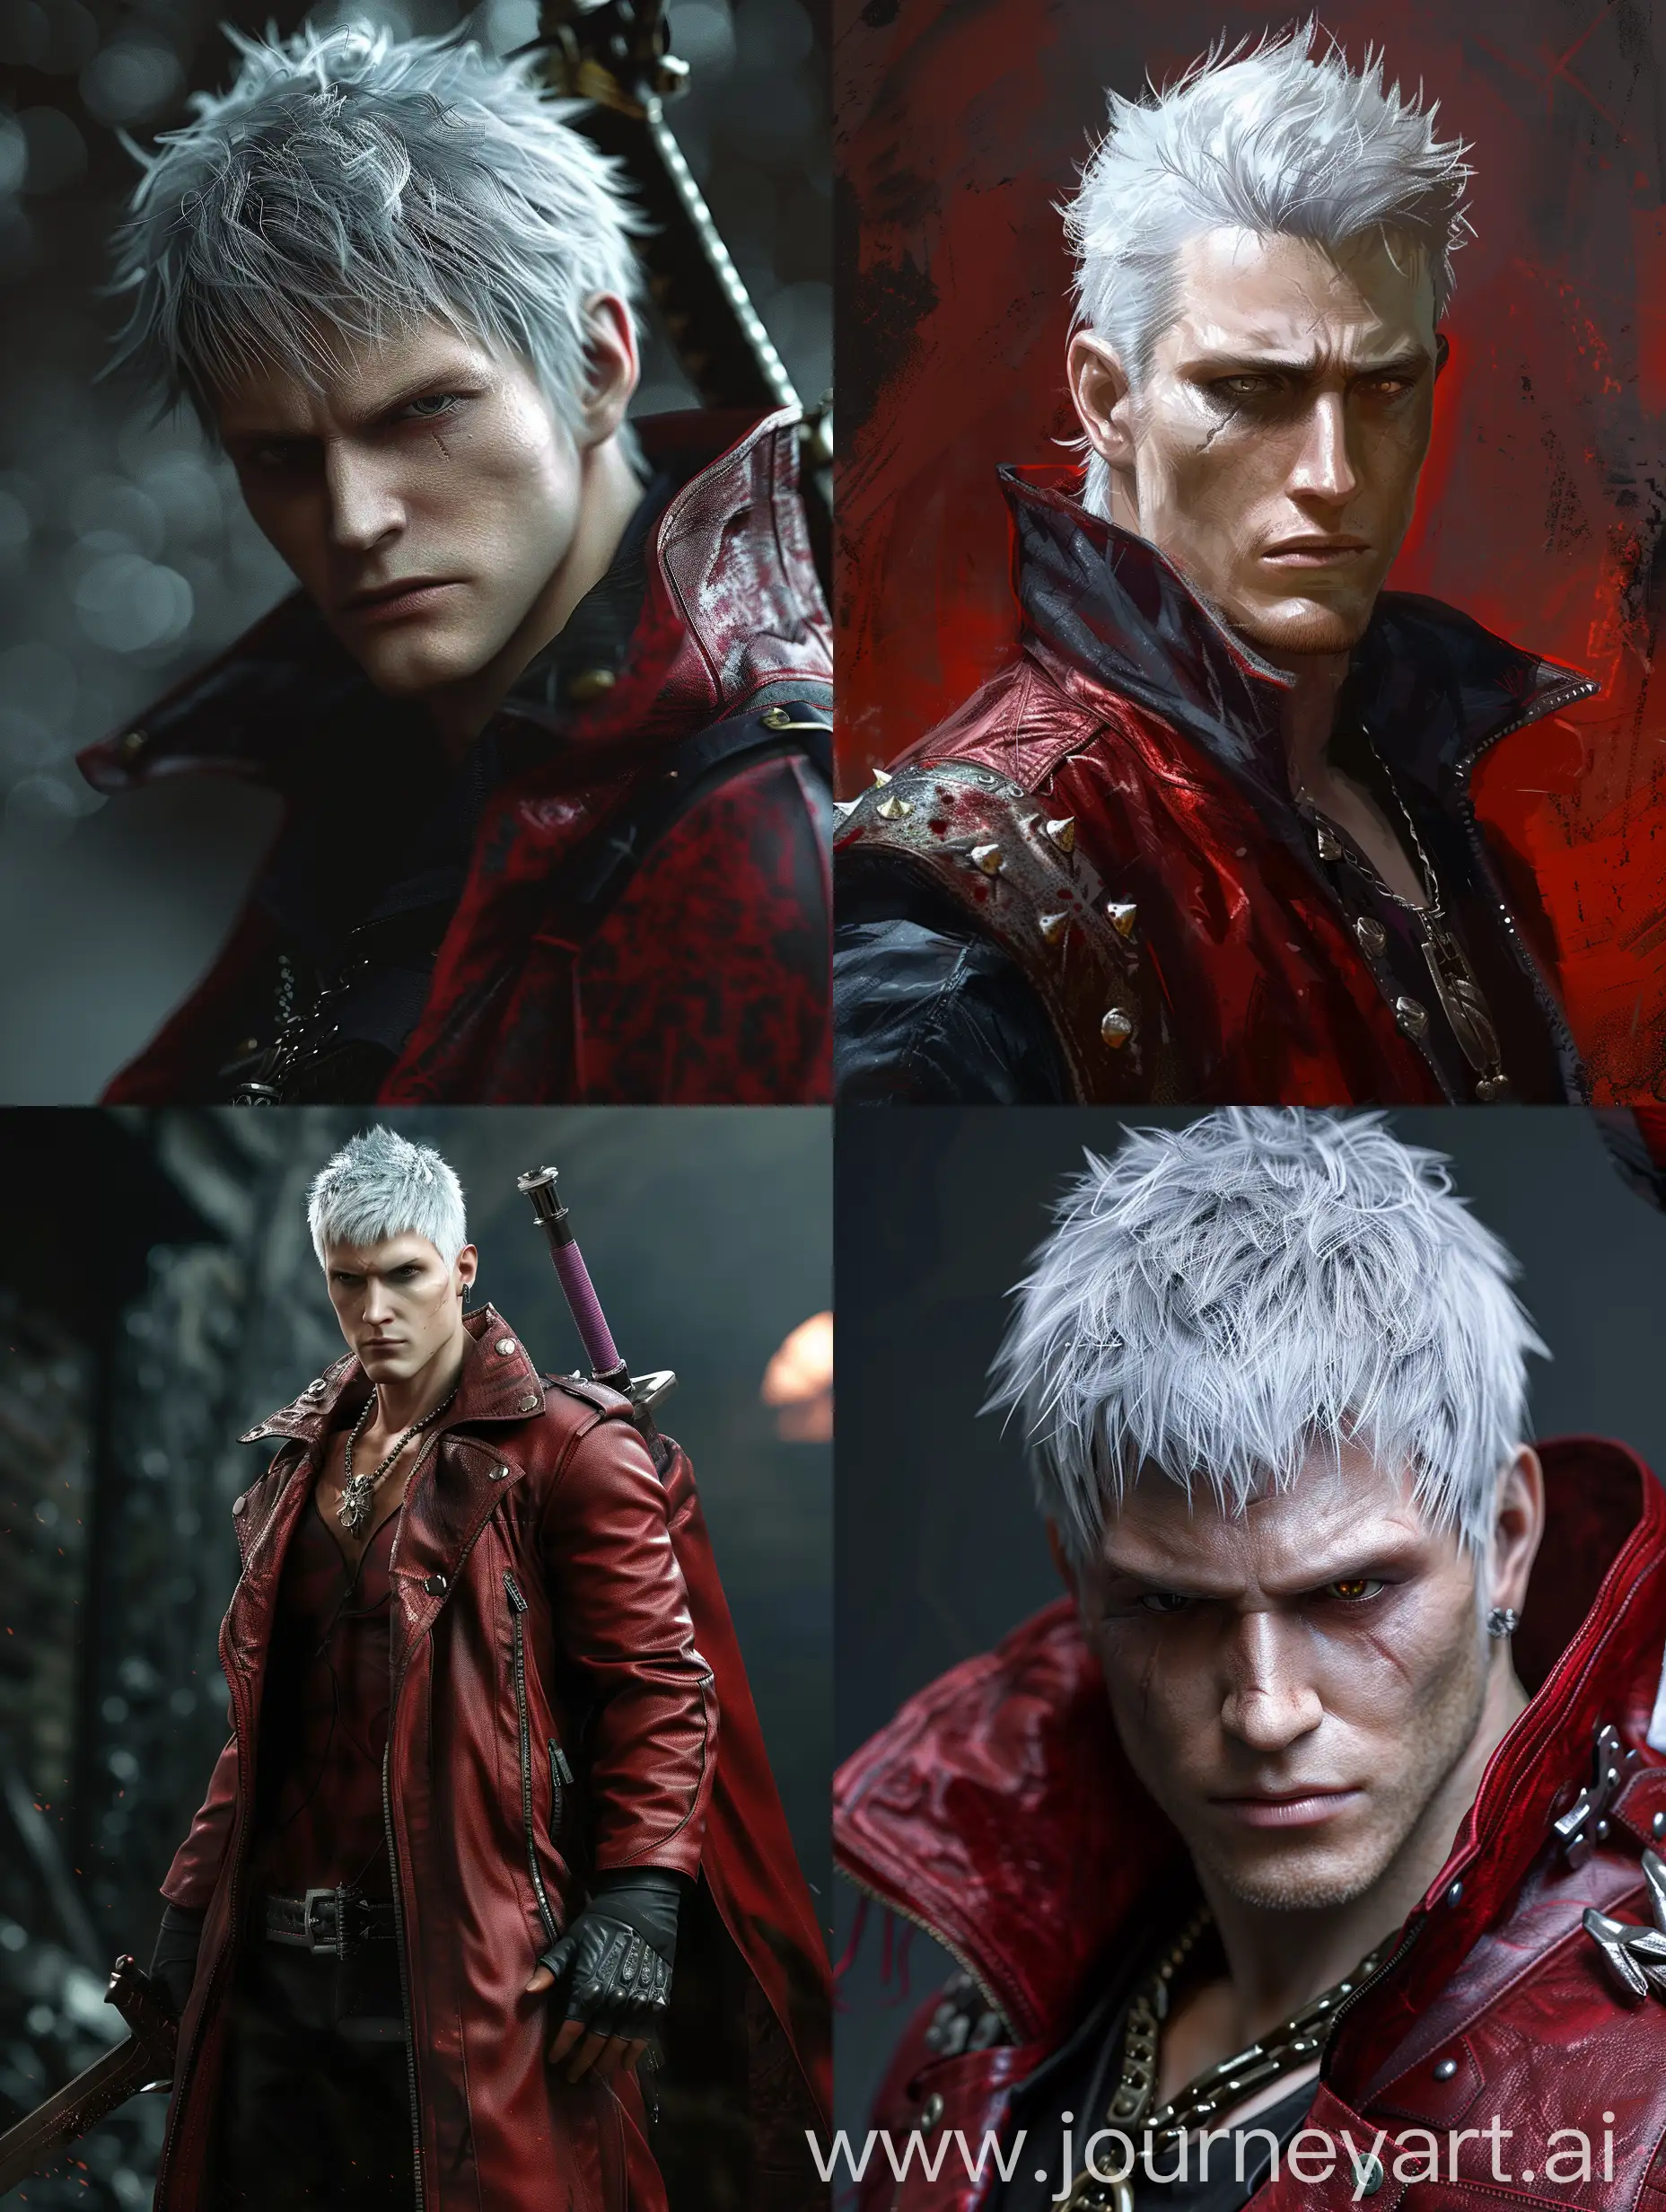 Virgil from the game" Devil May Cry" in realistic style 